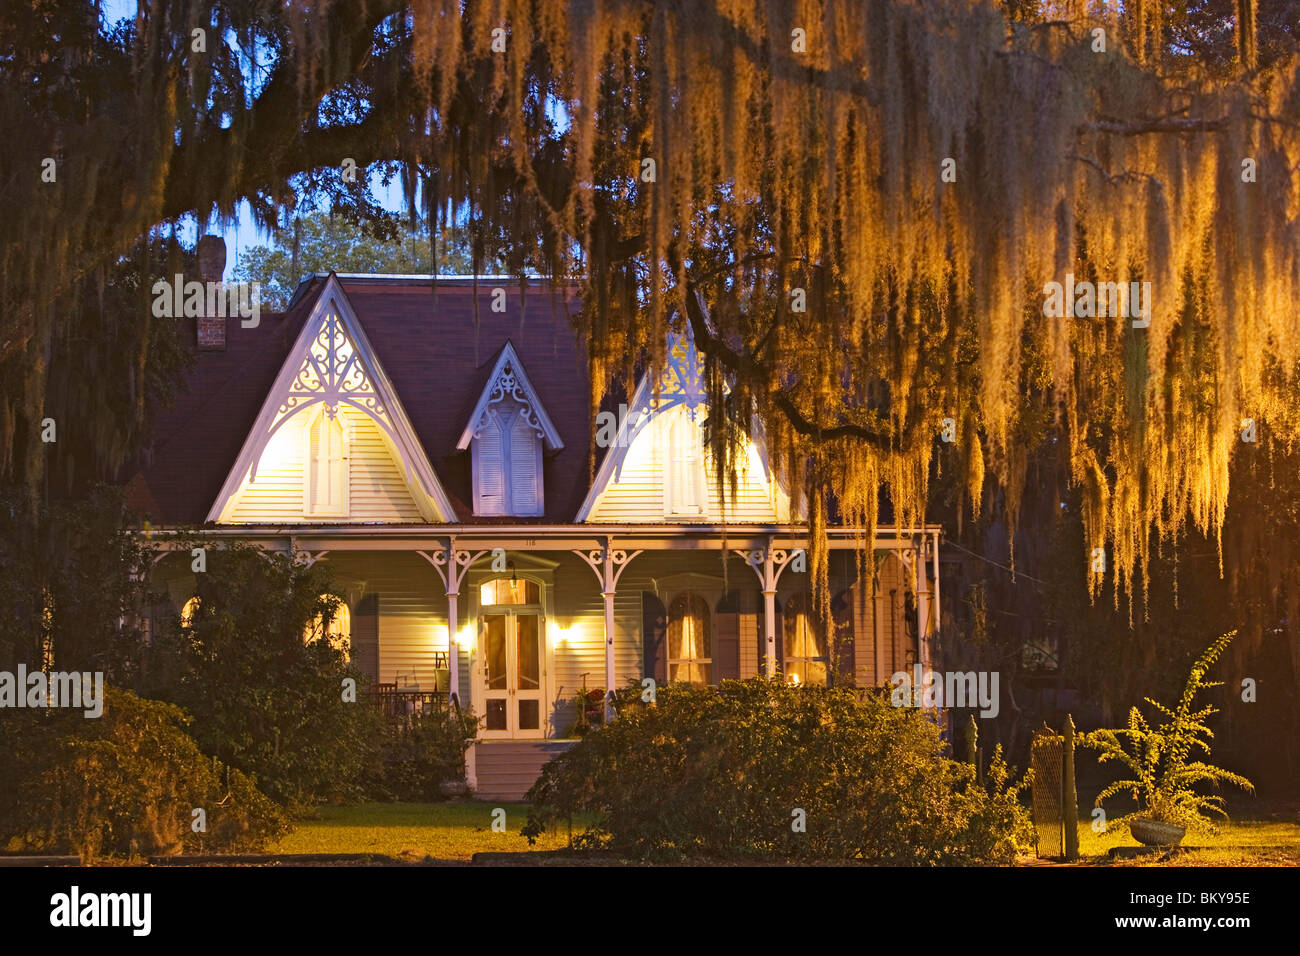 St. Francisville Inn Bed and Breakfast, built in the 1880s, is an excellent example of victorian gothic style, St. Francisville, Stock Photo